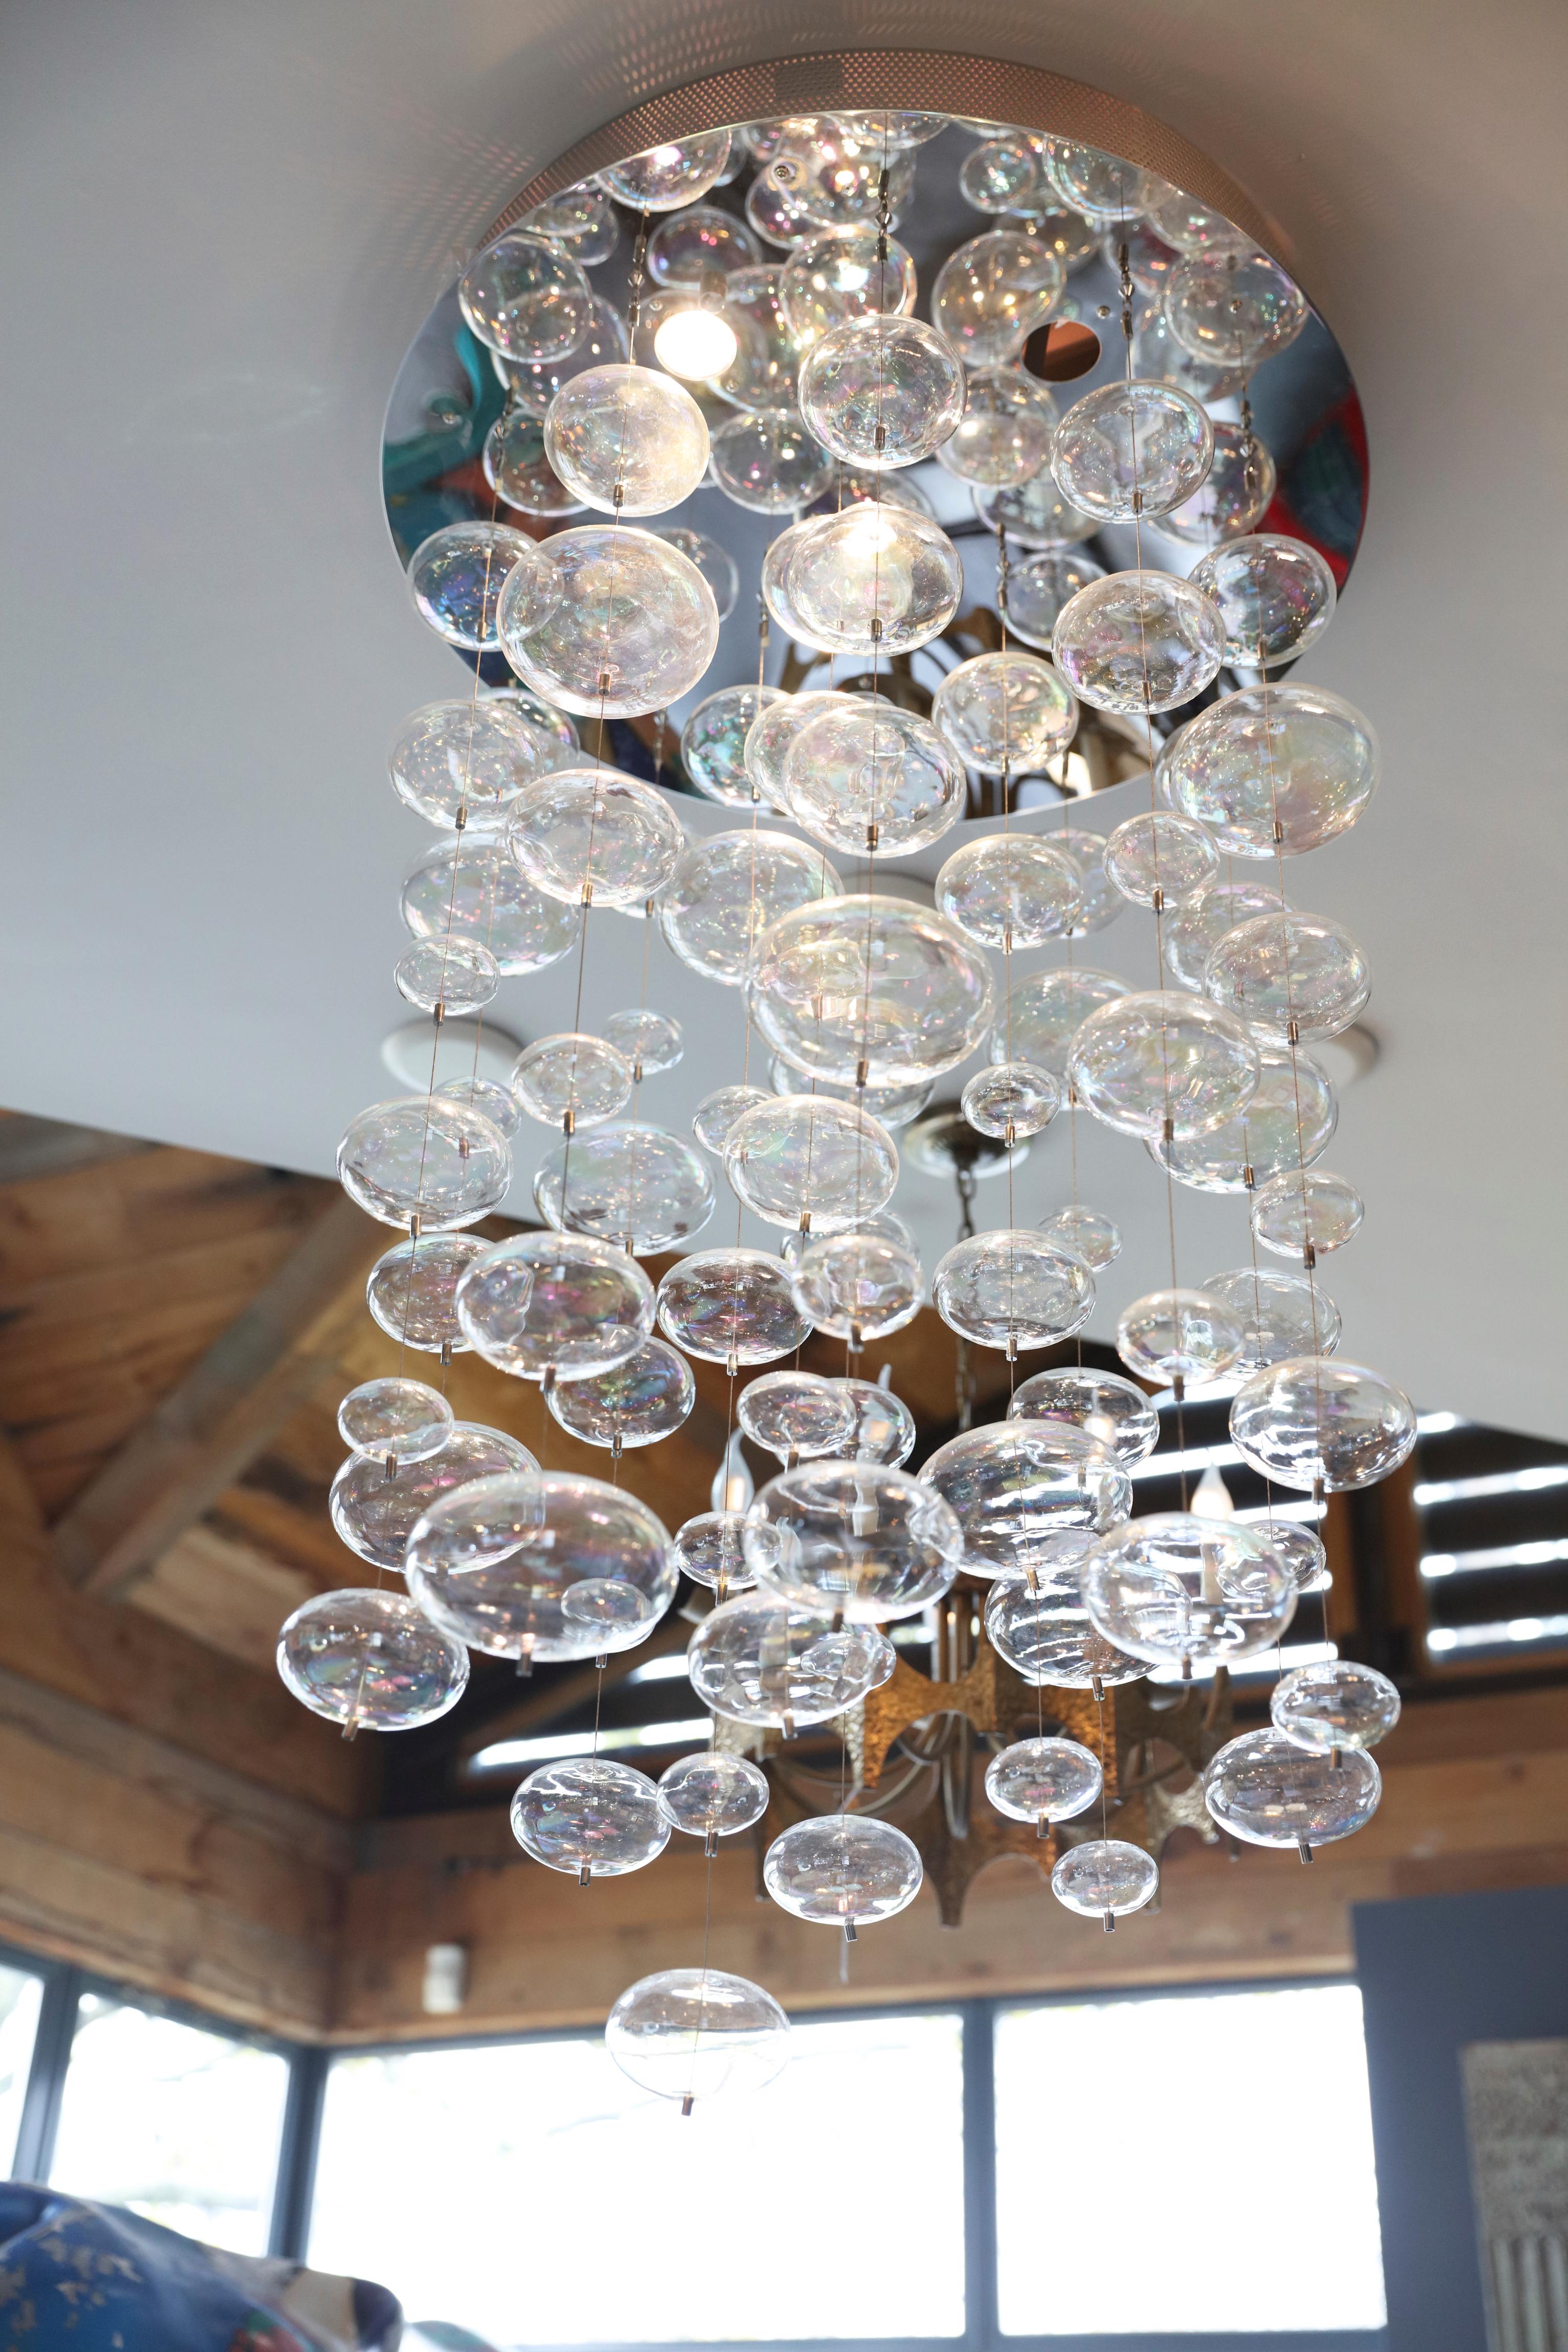 Round Mirrored Ceiling Fixture w/ Iridescent Glass Bubbles in the style of Patrick Jouin